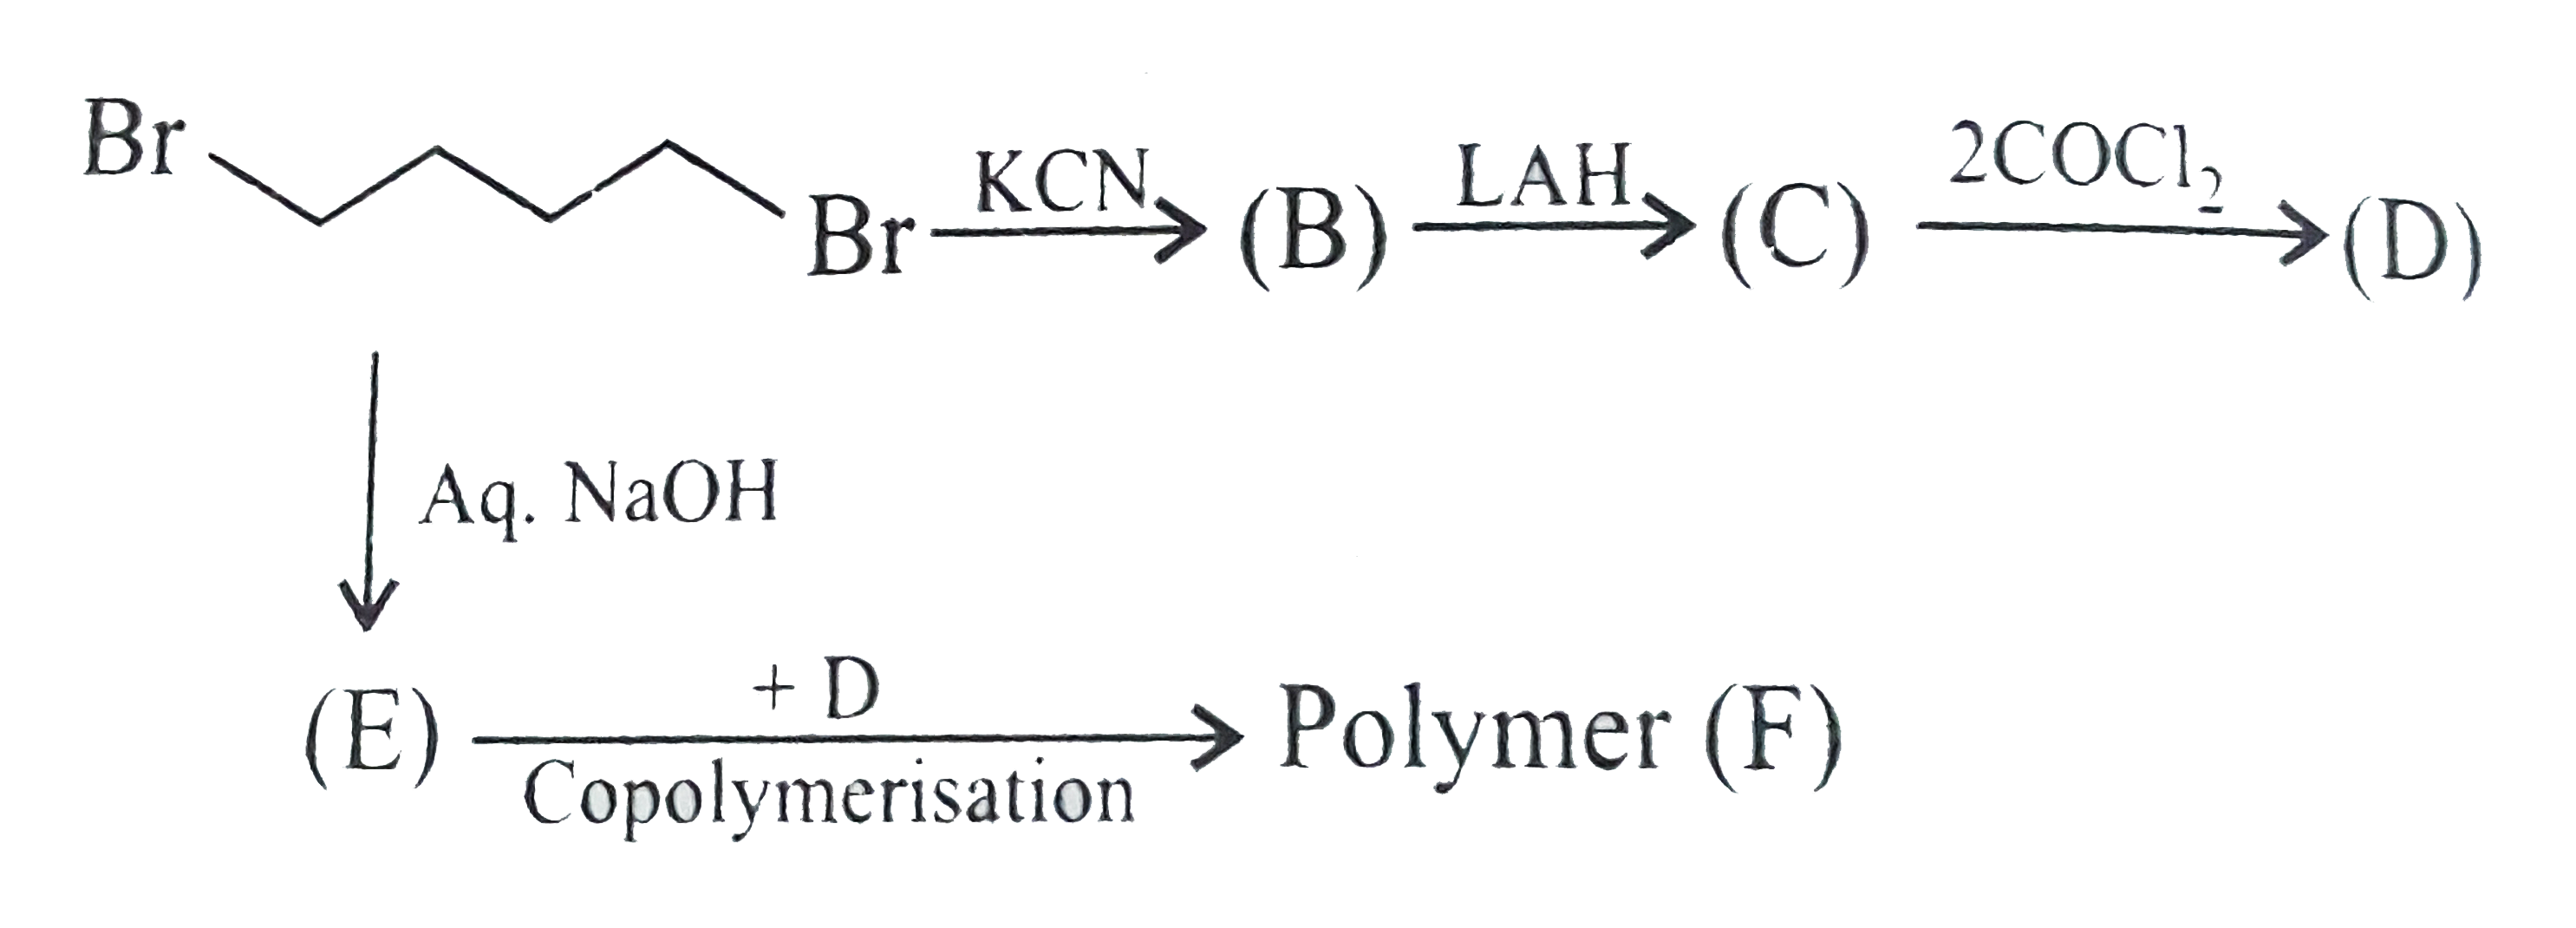 Which of the following group does polymer(F) contains?